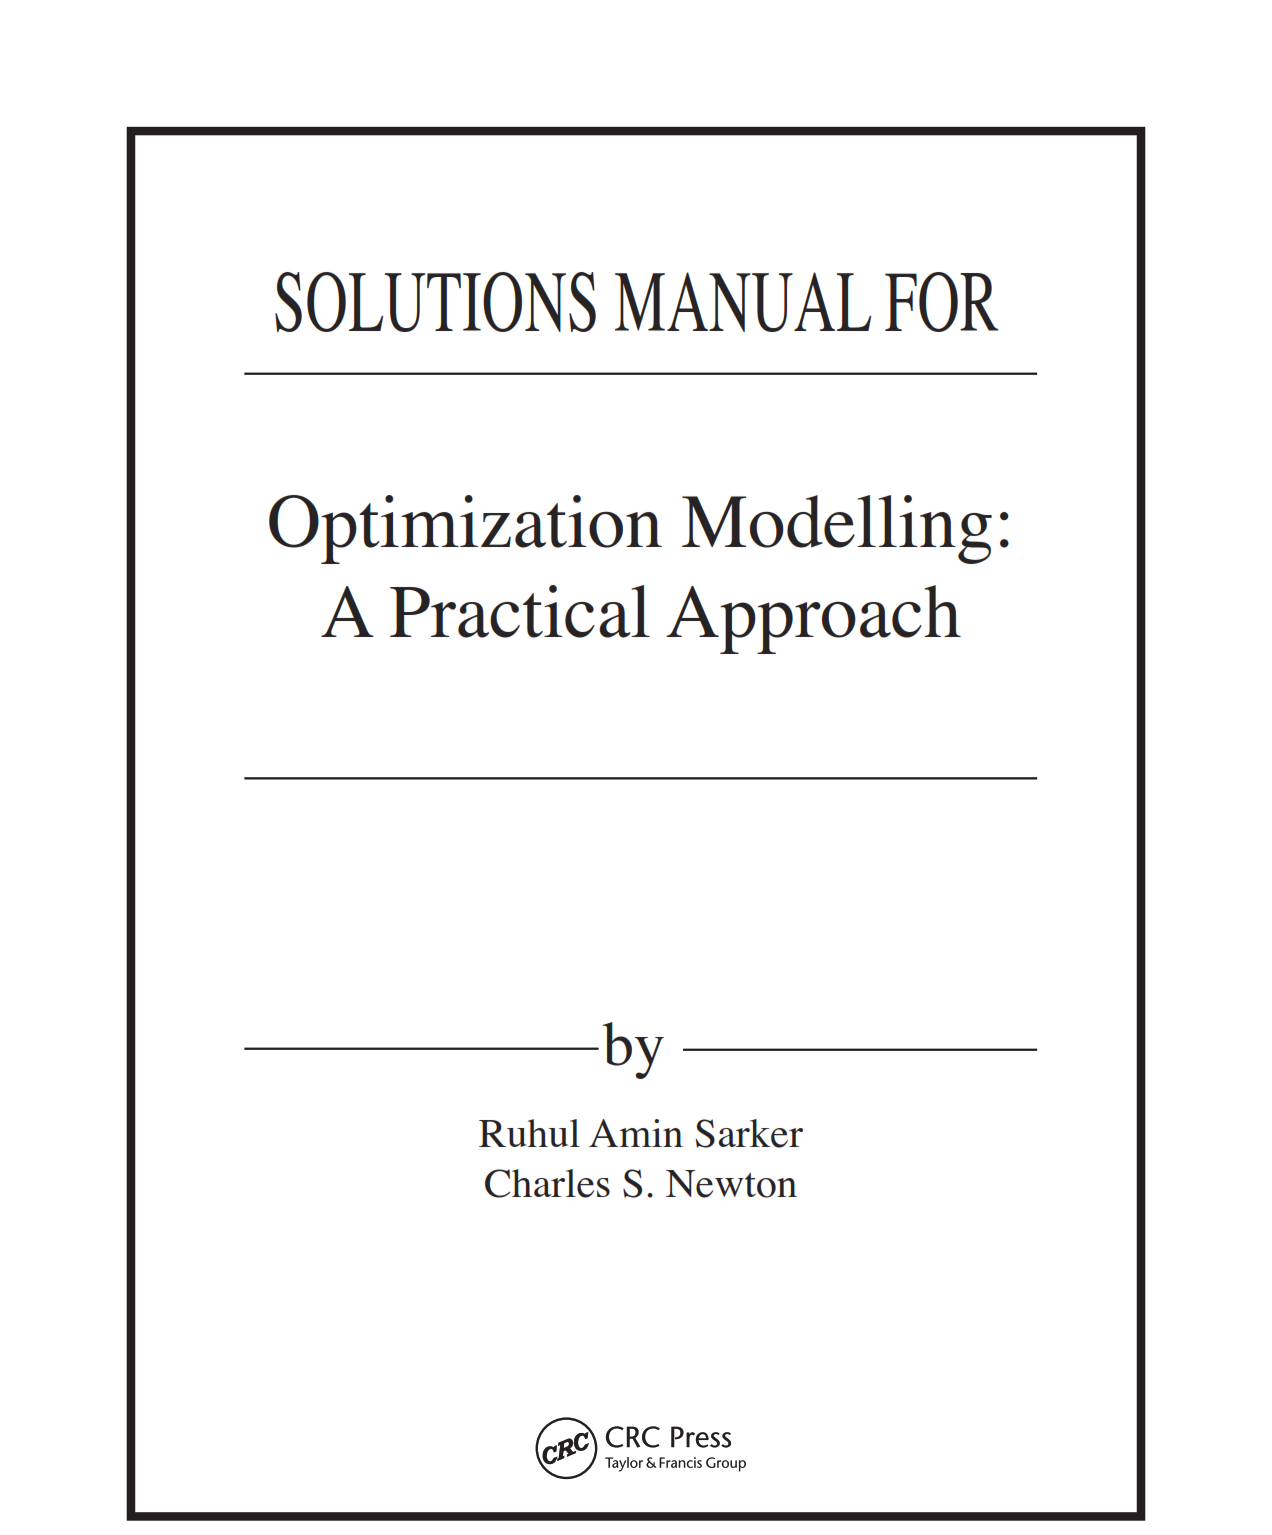 Download free Optimization modelling : a practical approach 1st edition by Sarker & Newton Solution manual pdf | Gioumeh solutions